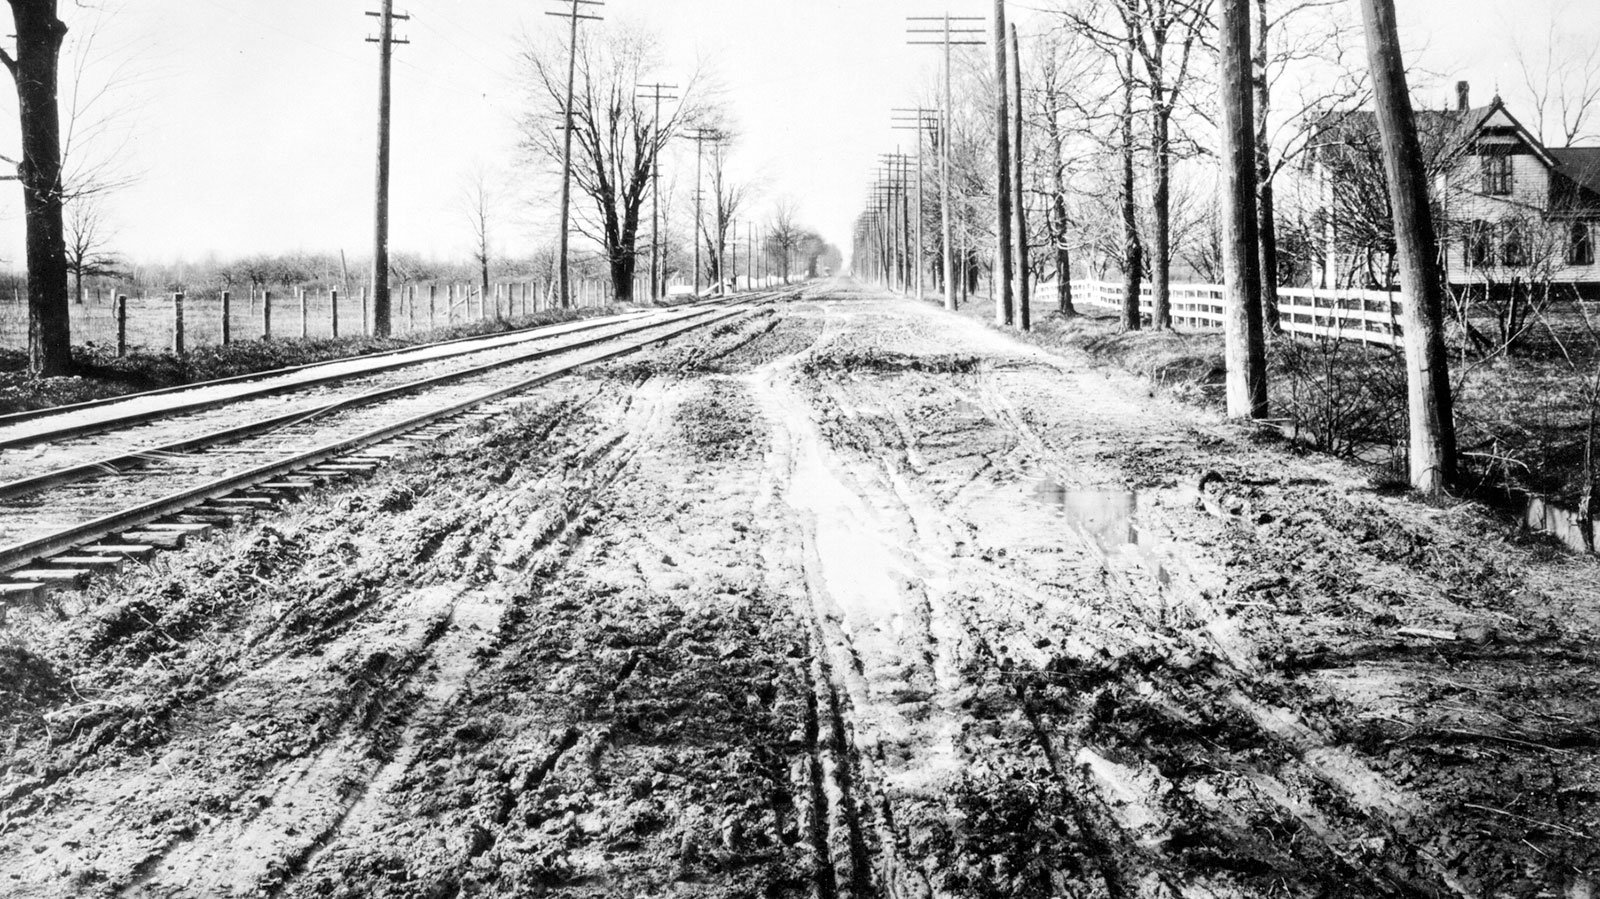 Woodward Avenue between Six and Seven Mile roads in 1908